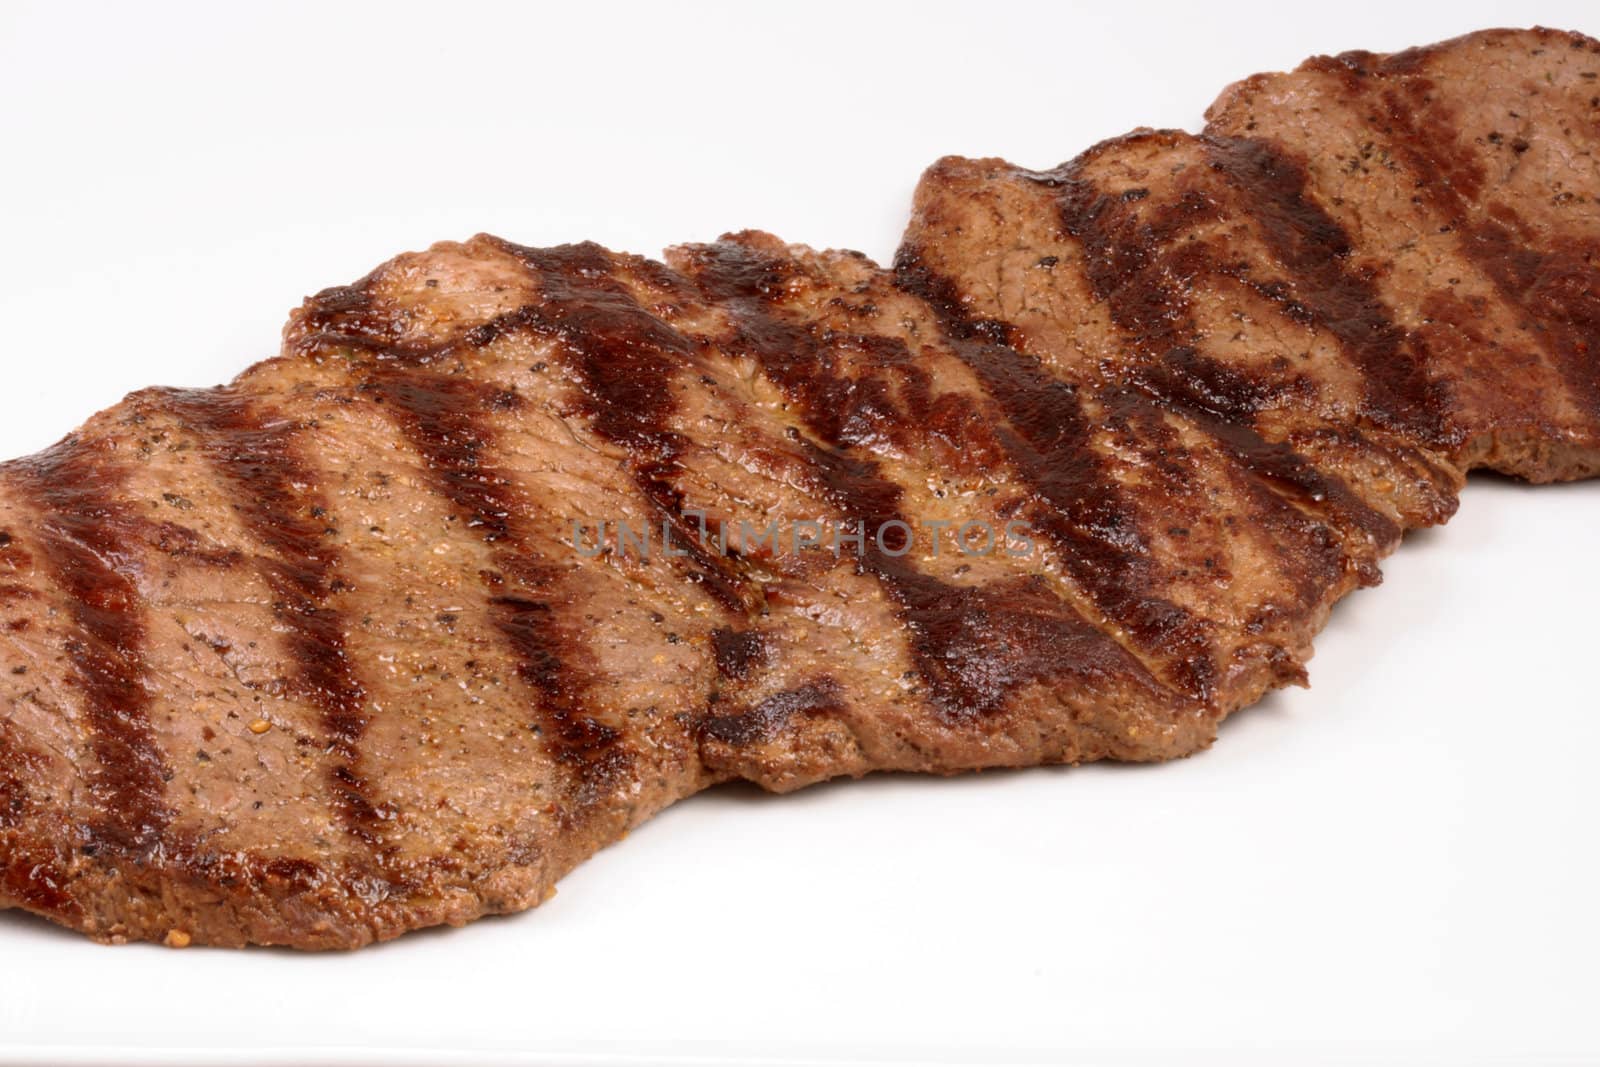 grilled beef   by tacar